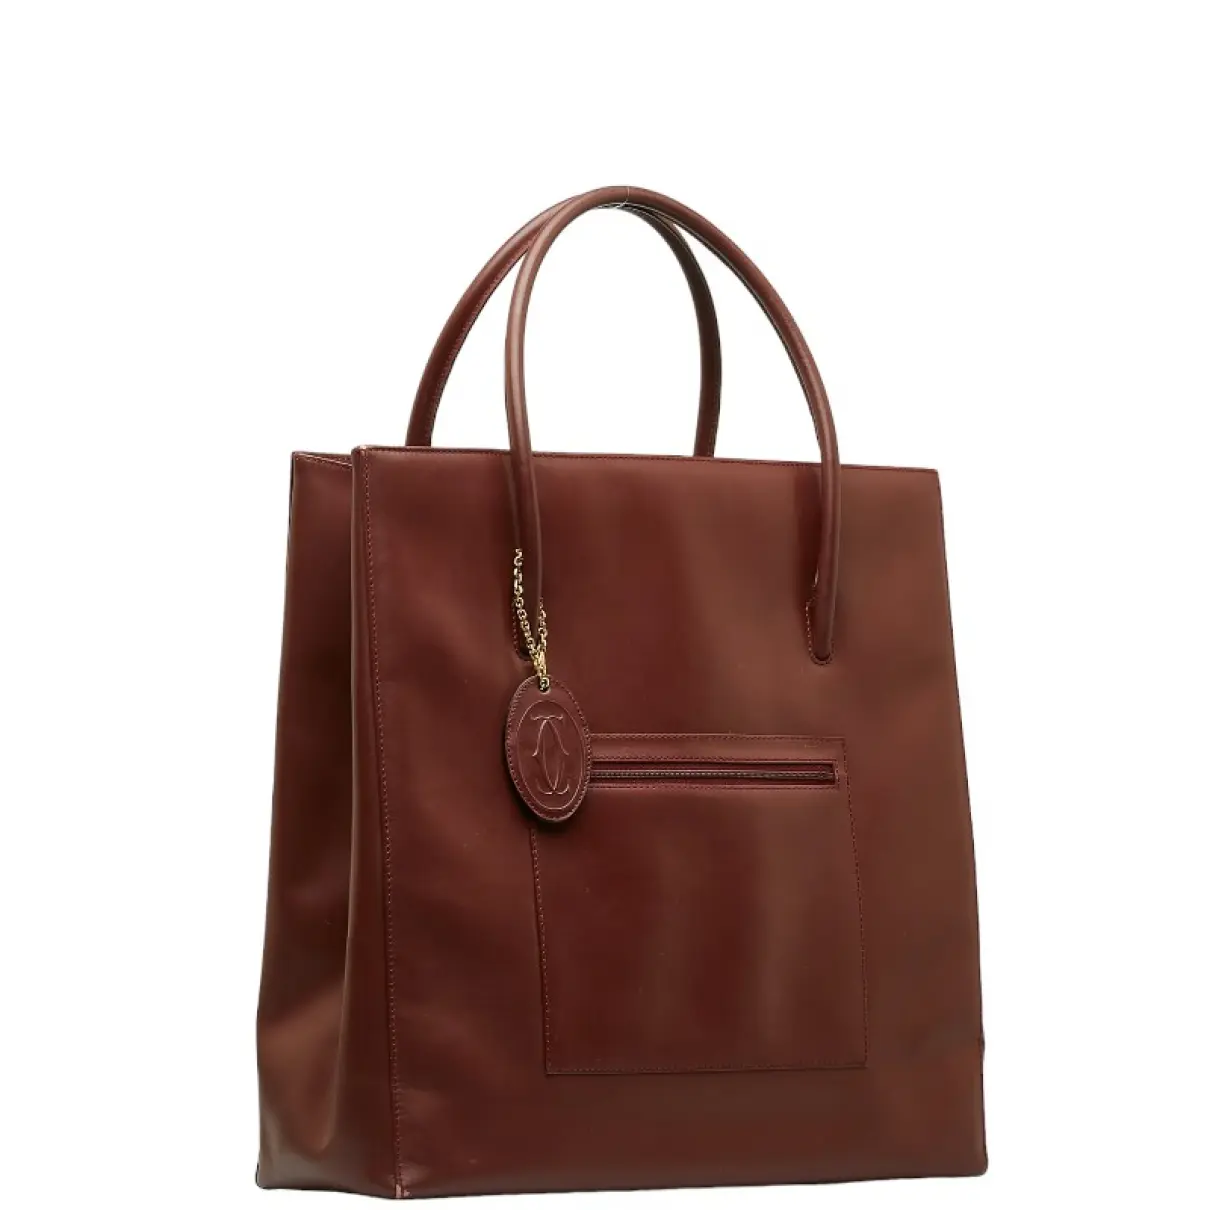 Buy Cartier Leather tote online